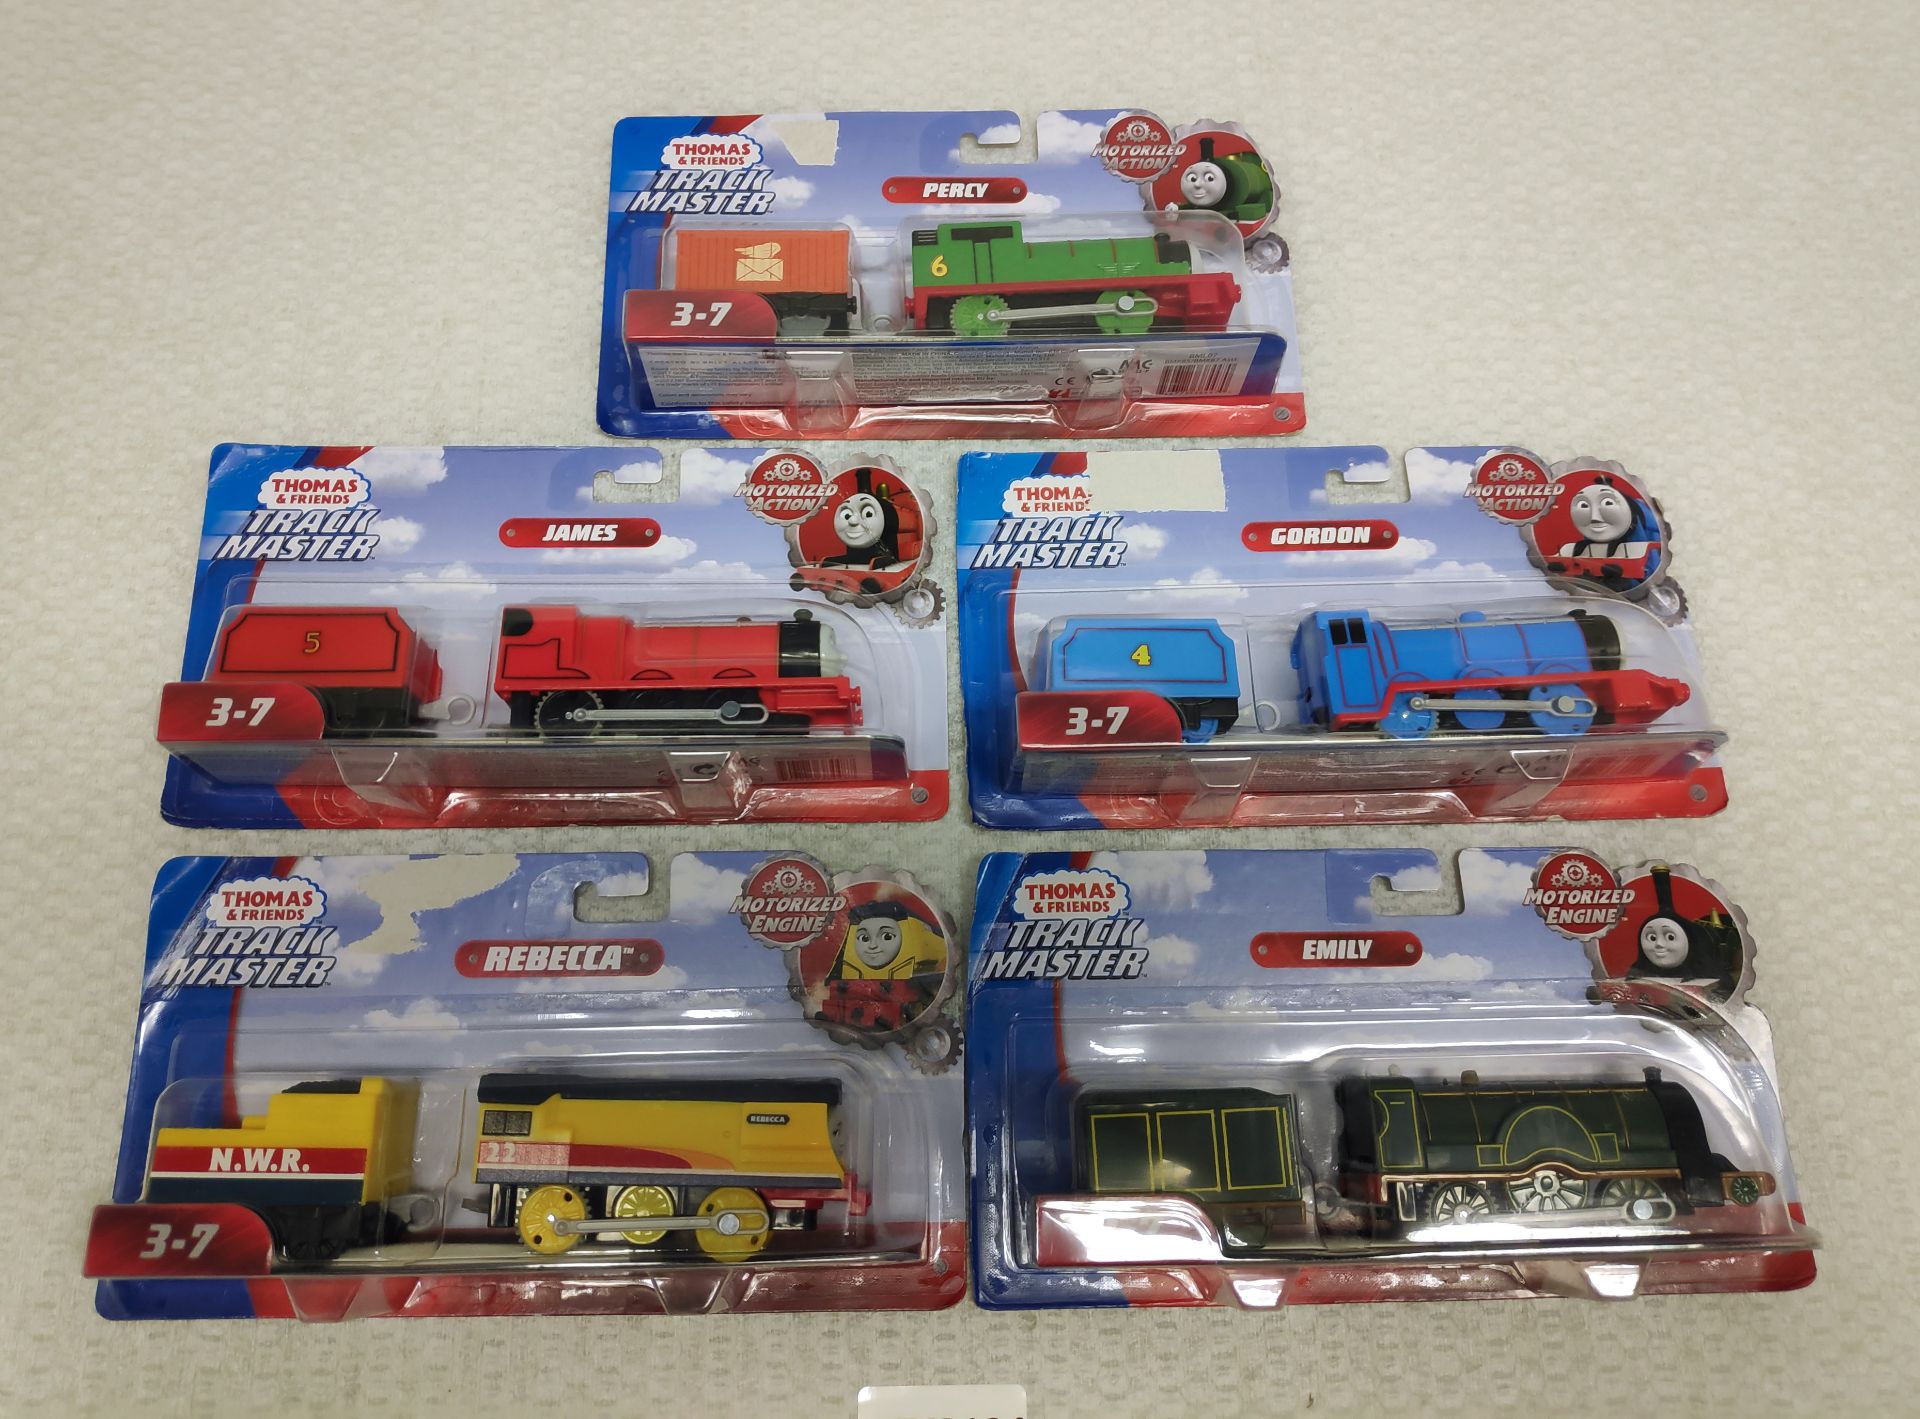 5 x Thomas & Friends Trackmaster Trains - Percy, Gordon, James, Emily and Rebecca - New/Boxed - HTYS - Image 2 of 8